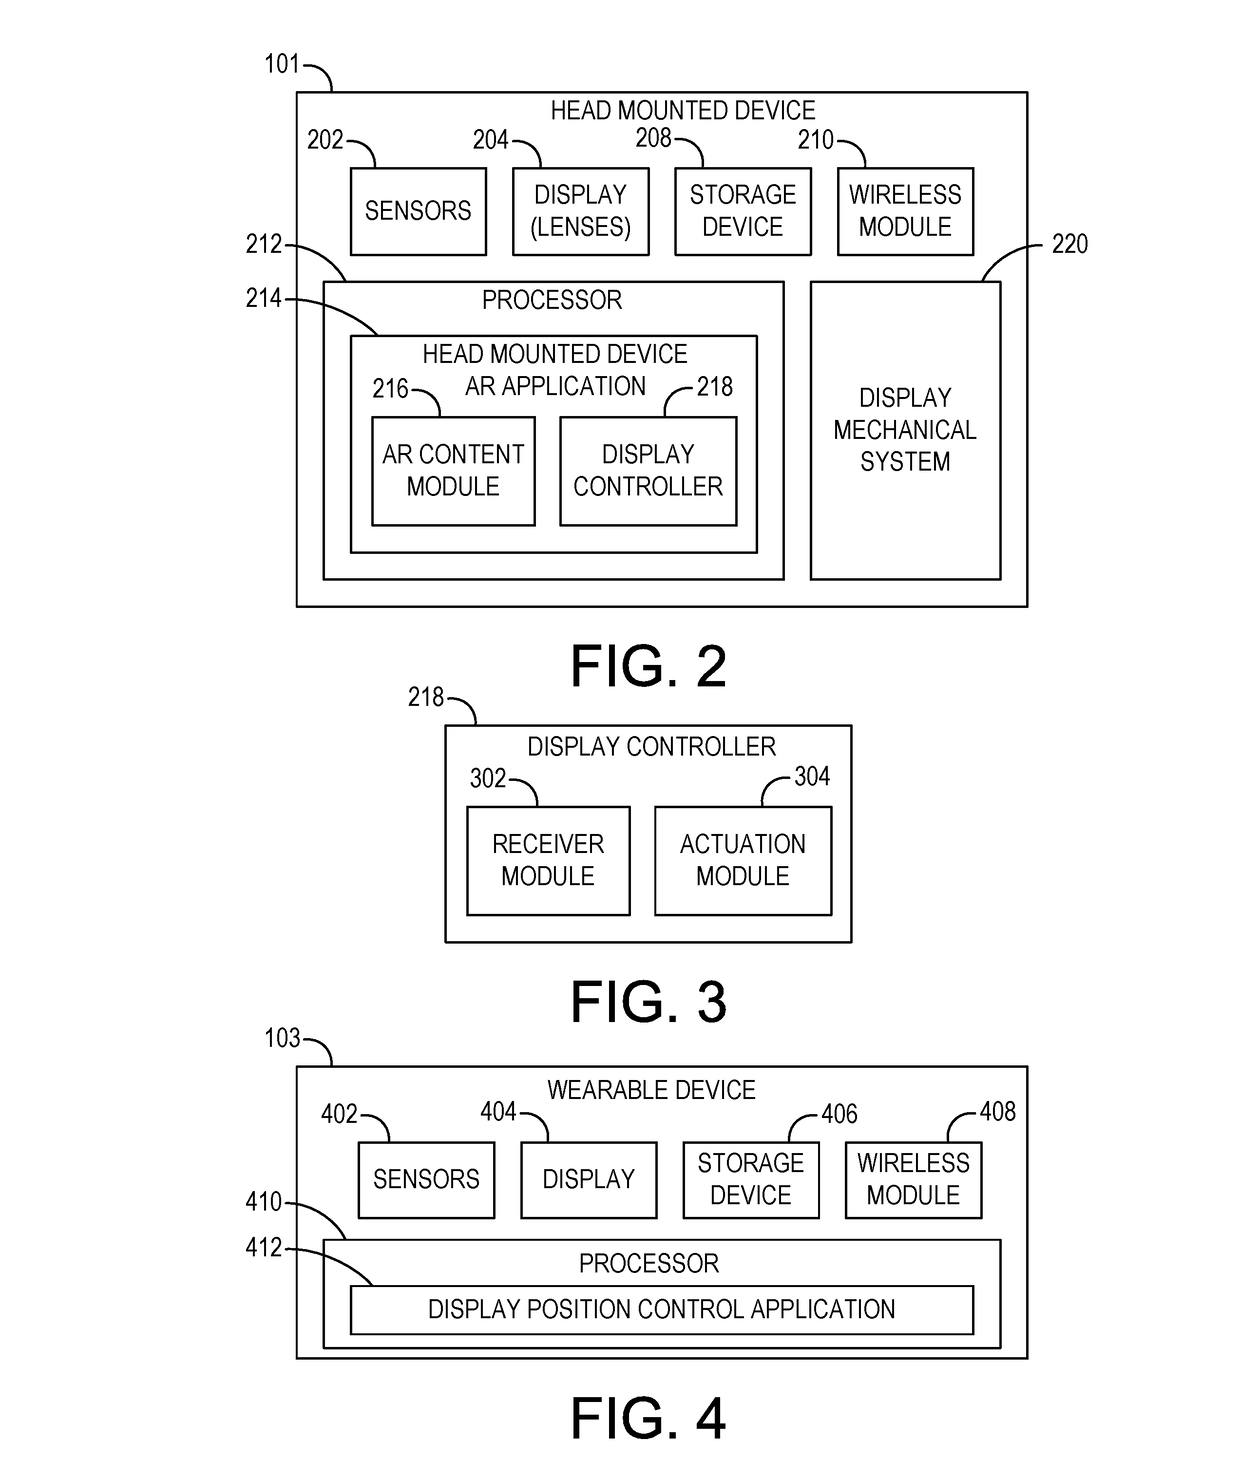 Task management system and method using augmented reality devices